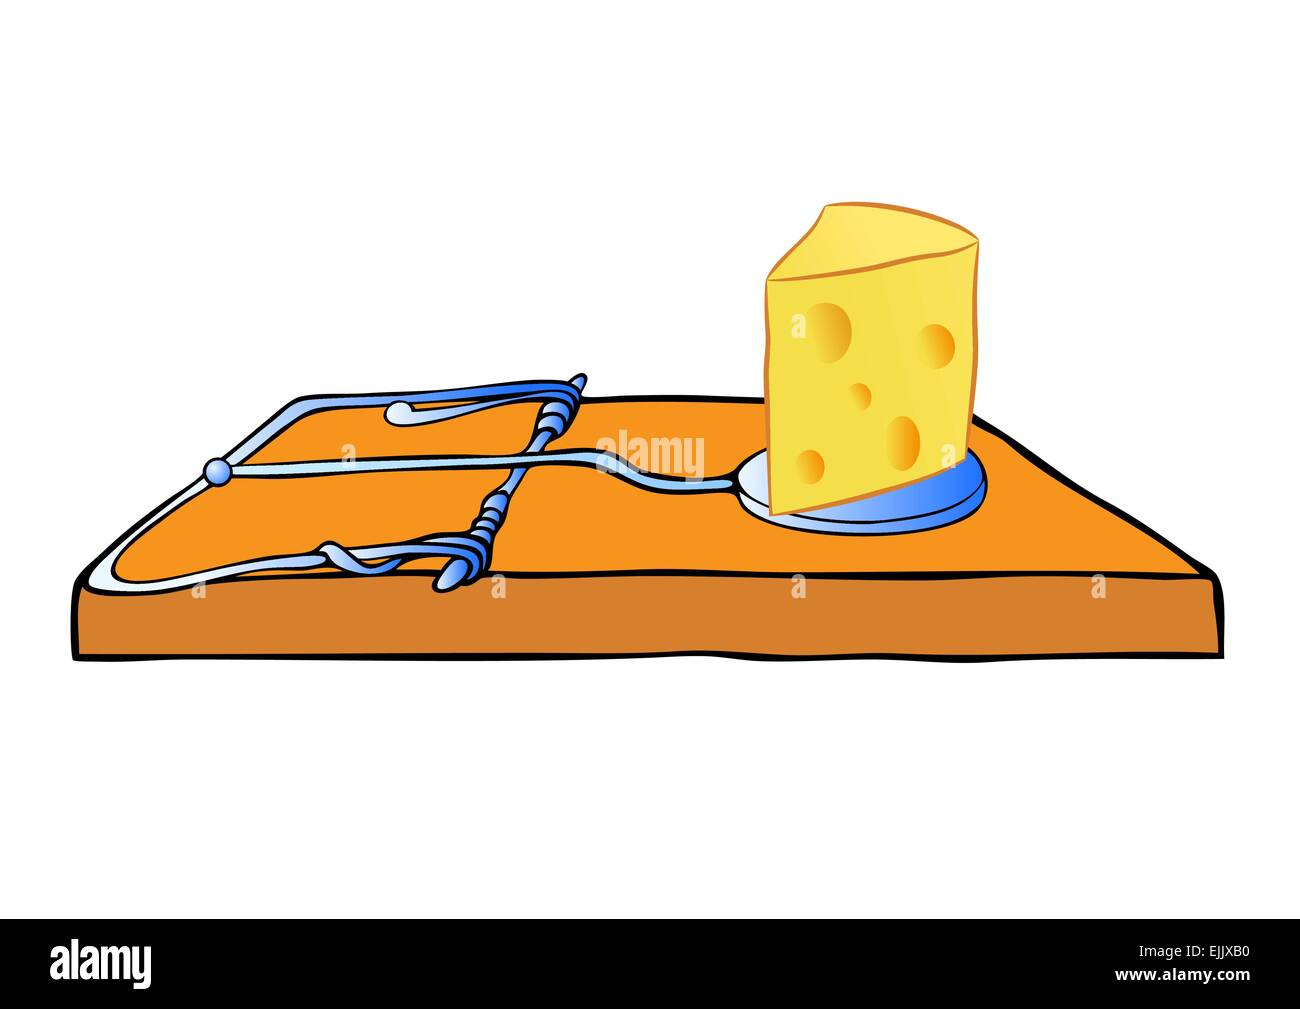 https://c8.alamy.com/comp/EJJXB0/vector-mousetrap-with-cheese-EJJXB0.jpg